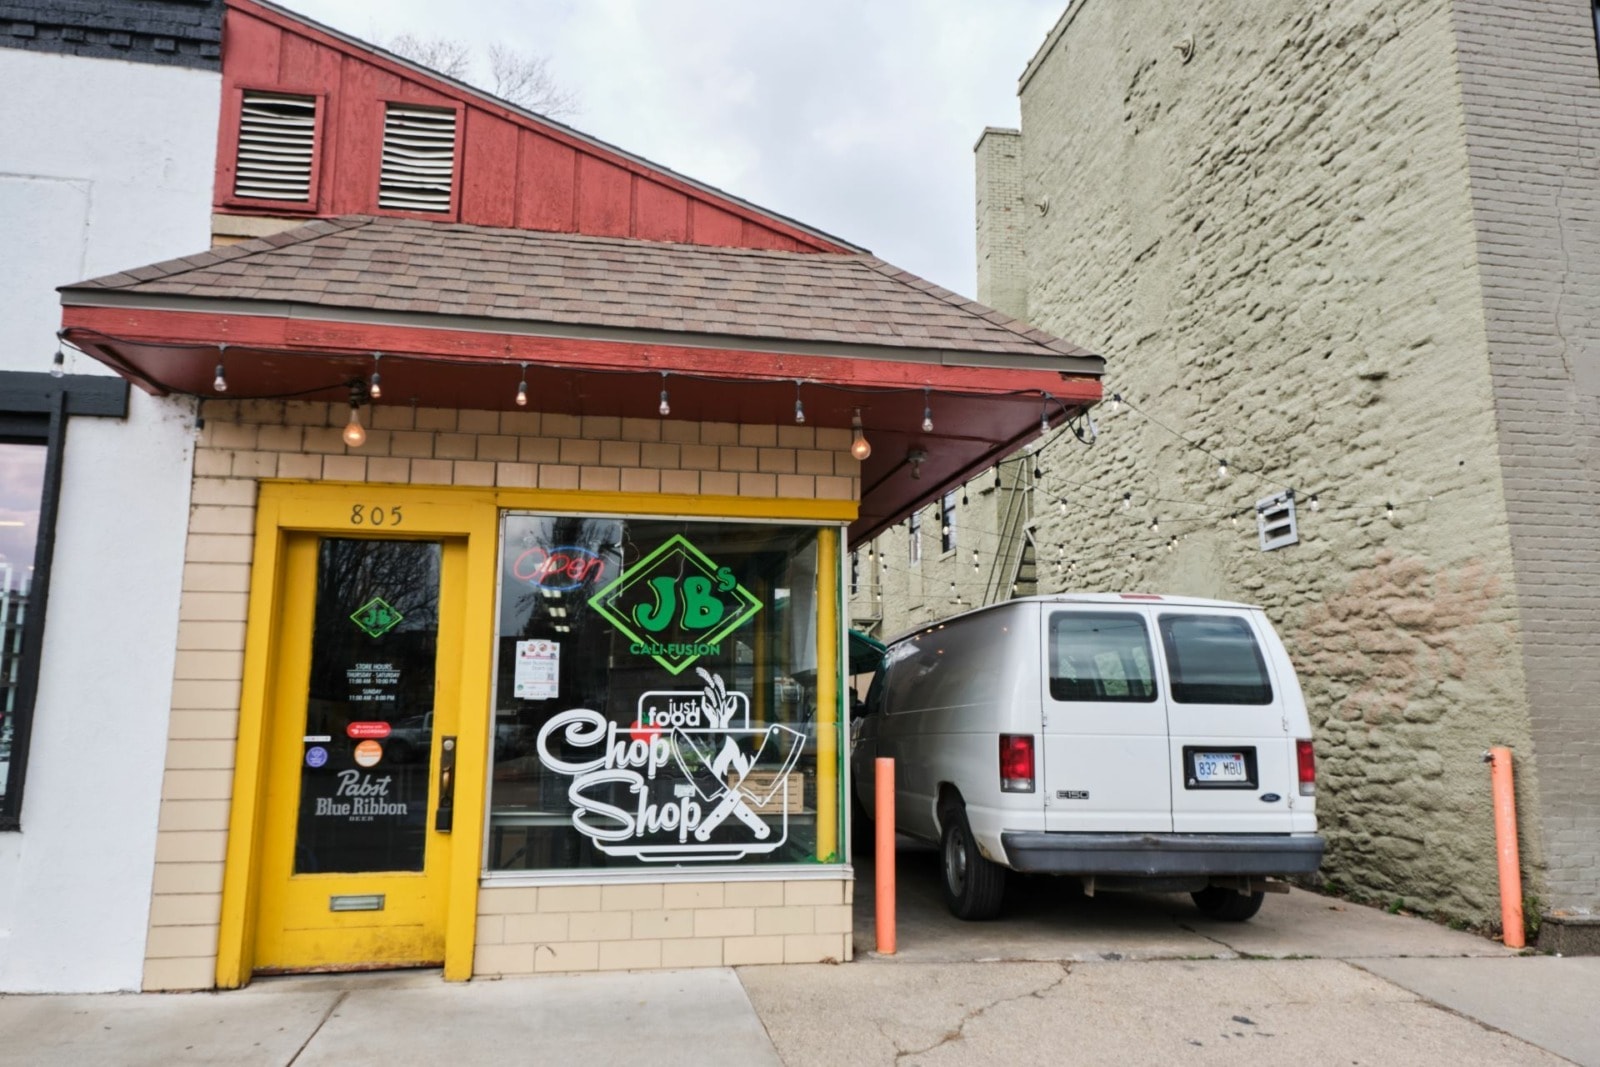 Exterior of Chop Shop's restaurant space in Lawrence, Kansas.